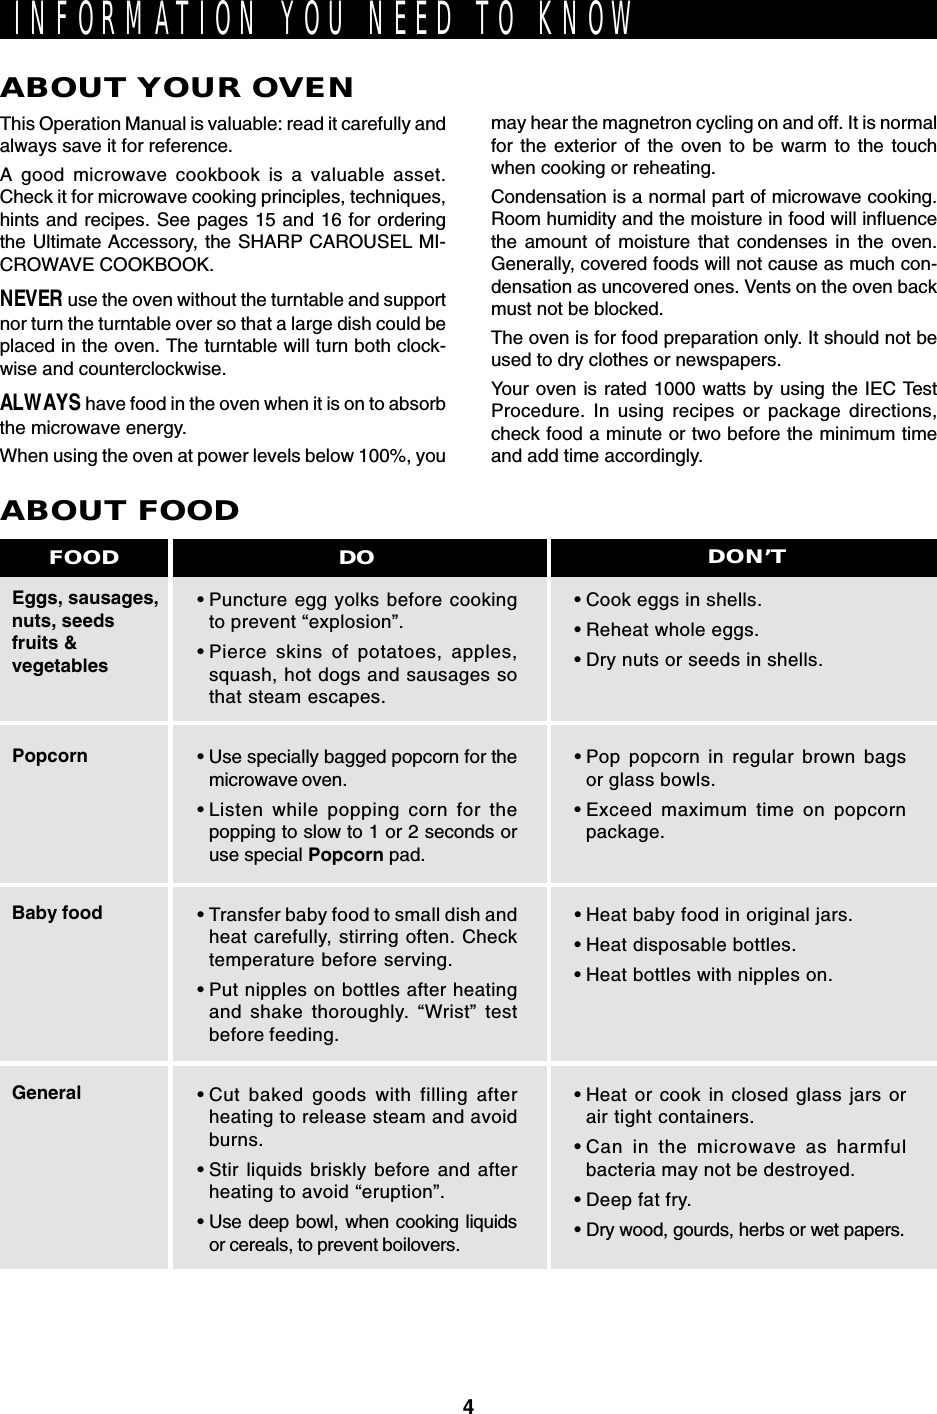 4INFORMATION YOU NEED TO KNOWABOUT YOUR OVENThis Operation Manual is valuable: read it carefully andalways save it for reference.A good microwave cookbook is a valuable asset.Check it for microwave cooking principles, techniques,hints and recipes. See pages 15 and 16 for orderingthe Ultimate Accessory, the SHARP CAROUSEL MI-CROWAVE COOKBOOK.NEVER use the oven without the turntable and supportnor turn the turntable over so that a large dish could beplaced in the oven. The turntable will turn both clock-wise and counterclockwise.ALWAYS have food in the oven when it is on to absorbthe microwave energy.When using the oven at power levels below 100%, youEggs, sausages,nuts, seedsfruits &amp;vegetablesPopcornBaby foodGeneralABOUT FOOD•Puncture egg yolks before cookingto prevent “explosion”.•Pierce skins of potatoes, apples,squash, hot dogs and sausages sothat steam escapes.• Use specially bagged popcorn for themicrowave oven.•Listen while popping corn for thepopping to slow to 1 or 2 seconds oruse special Popcorn pad.•Transfer baby food to small dish andheat carefully, stirring often. Checktemperature before serving.•Put nipples on bottles after heatingand shake thoroughly. “Wrist” testbefore feeding.•Cut baked goods with filling afterheating to release steam and avoidburns.•Stir liquids briskly before and afterheating to avoid “eruption”.•Use deep bowl, when cooking liquidsor cereals, to prevent boilovers.•Cook eggs in shells.•Reheat whole eggs.•Dry nuts or seeds in shells.•Pop popcorn in regular brown bagsor glass bowls.•Exceed maximum time on popcornpackage.•Heat baby food in original jars.•Heat disposable bottles.•Heat bottles with nipples on.•Heat or cook in closed glass jars orair tight containers.•Can in the microwave as harmfulbacteria may not be destroyed.•Deep fat fry.•Dry wood, gourds, herbs or wet papers.DO DON’TFOODmay hear the magnetron cycling on and off. It is normalfor the exterior of the oven to be warm to the touchwhen cooking or reheating.Condensation is a normal part of microwave cooking.Room humidity and the moisture in food will influencethe amount of moisture that condenses in the oven.Generally, covered foods will not cause as much con-densation as uncovered ones. Vents on the oven backmust not be blocked.The oven is for food preparation only. It should not beused to dry clothes or newspapers.Your oven is rated 1000 watts by using the IEC TestProcedure. In using recipes or package directions,check food a minute or two before the minimum timeand add time accordingly.